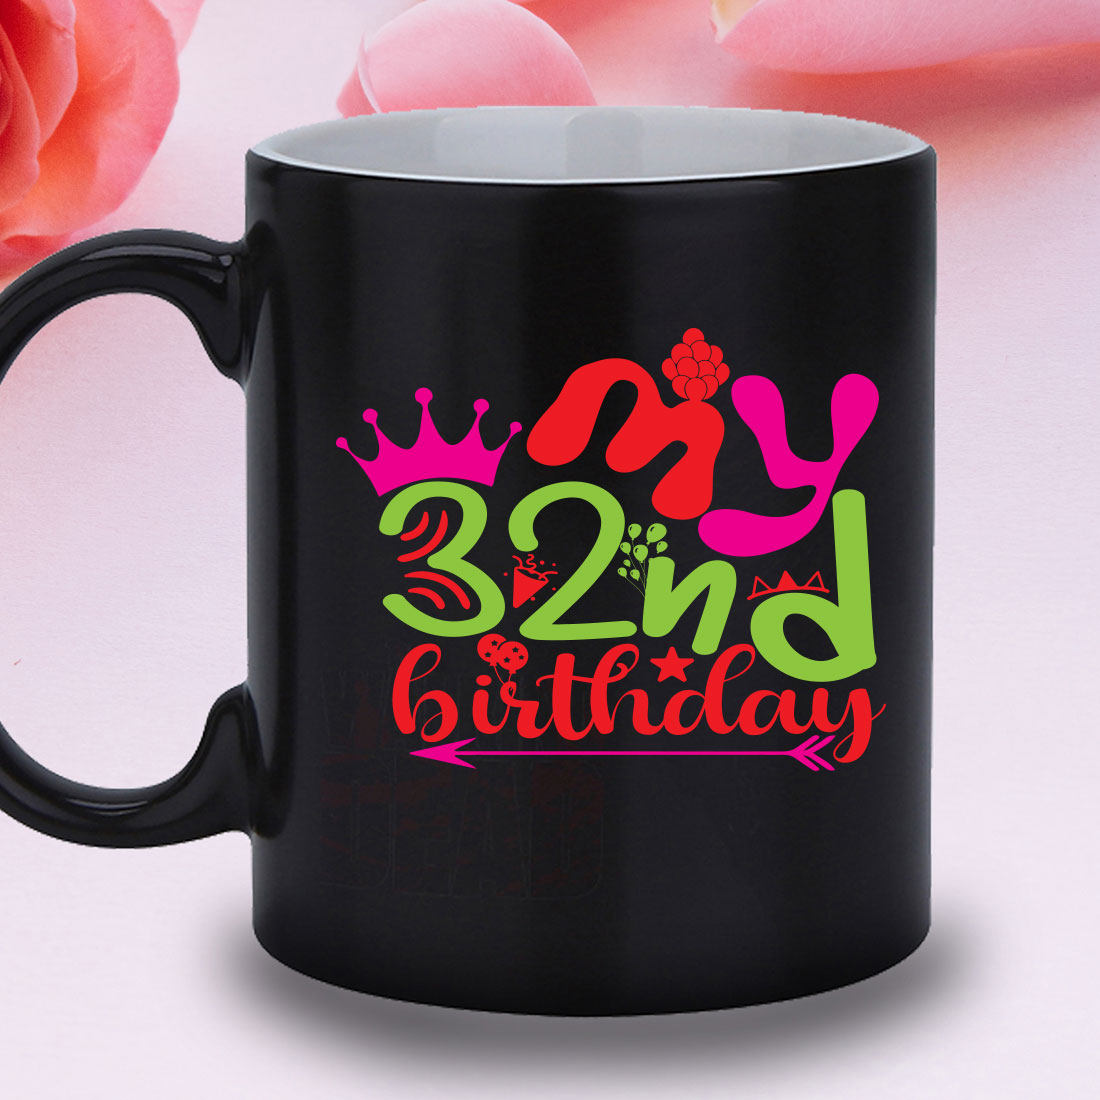 Black coffee mug with a pink rose in the background.